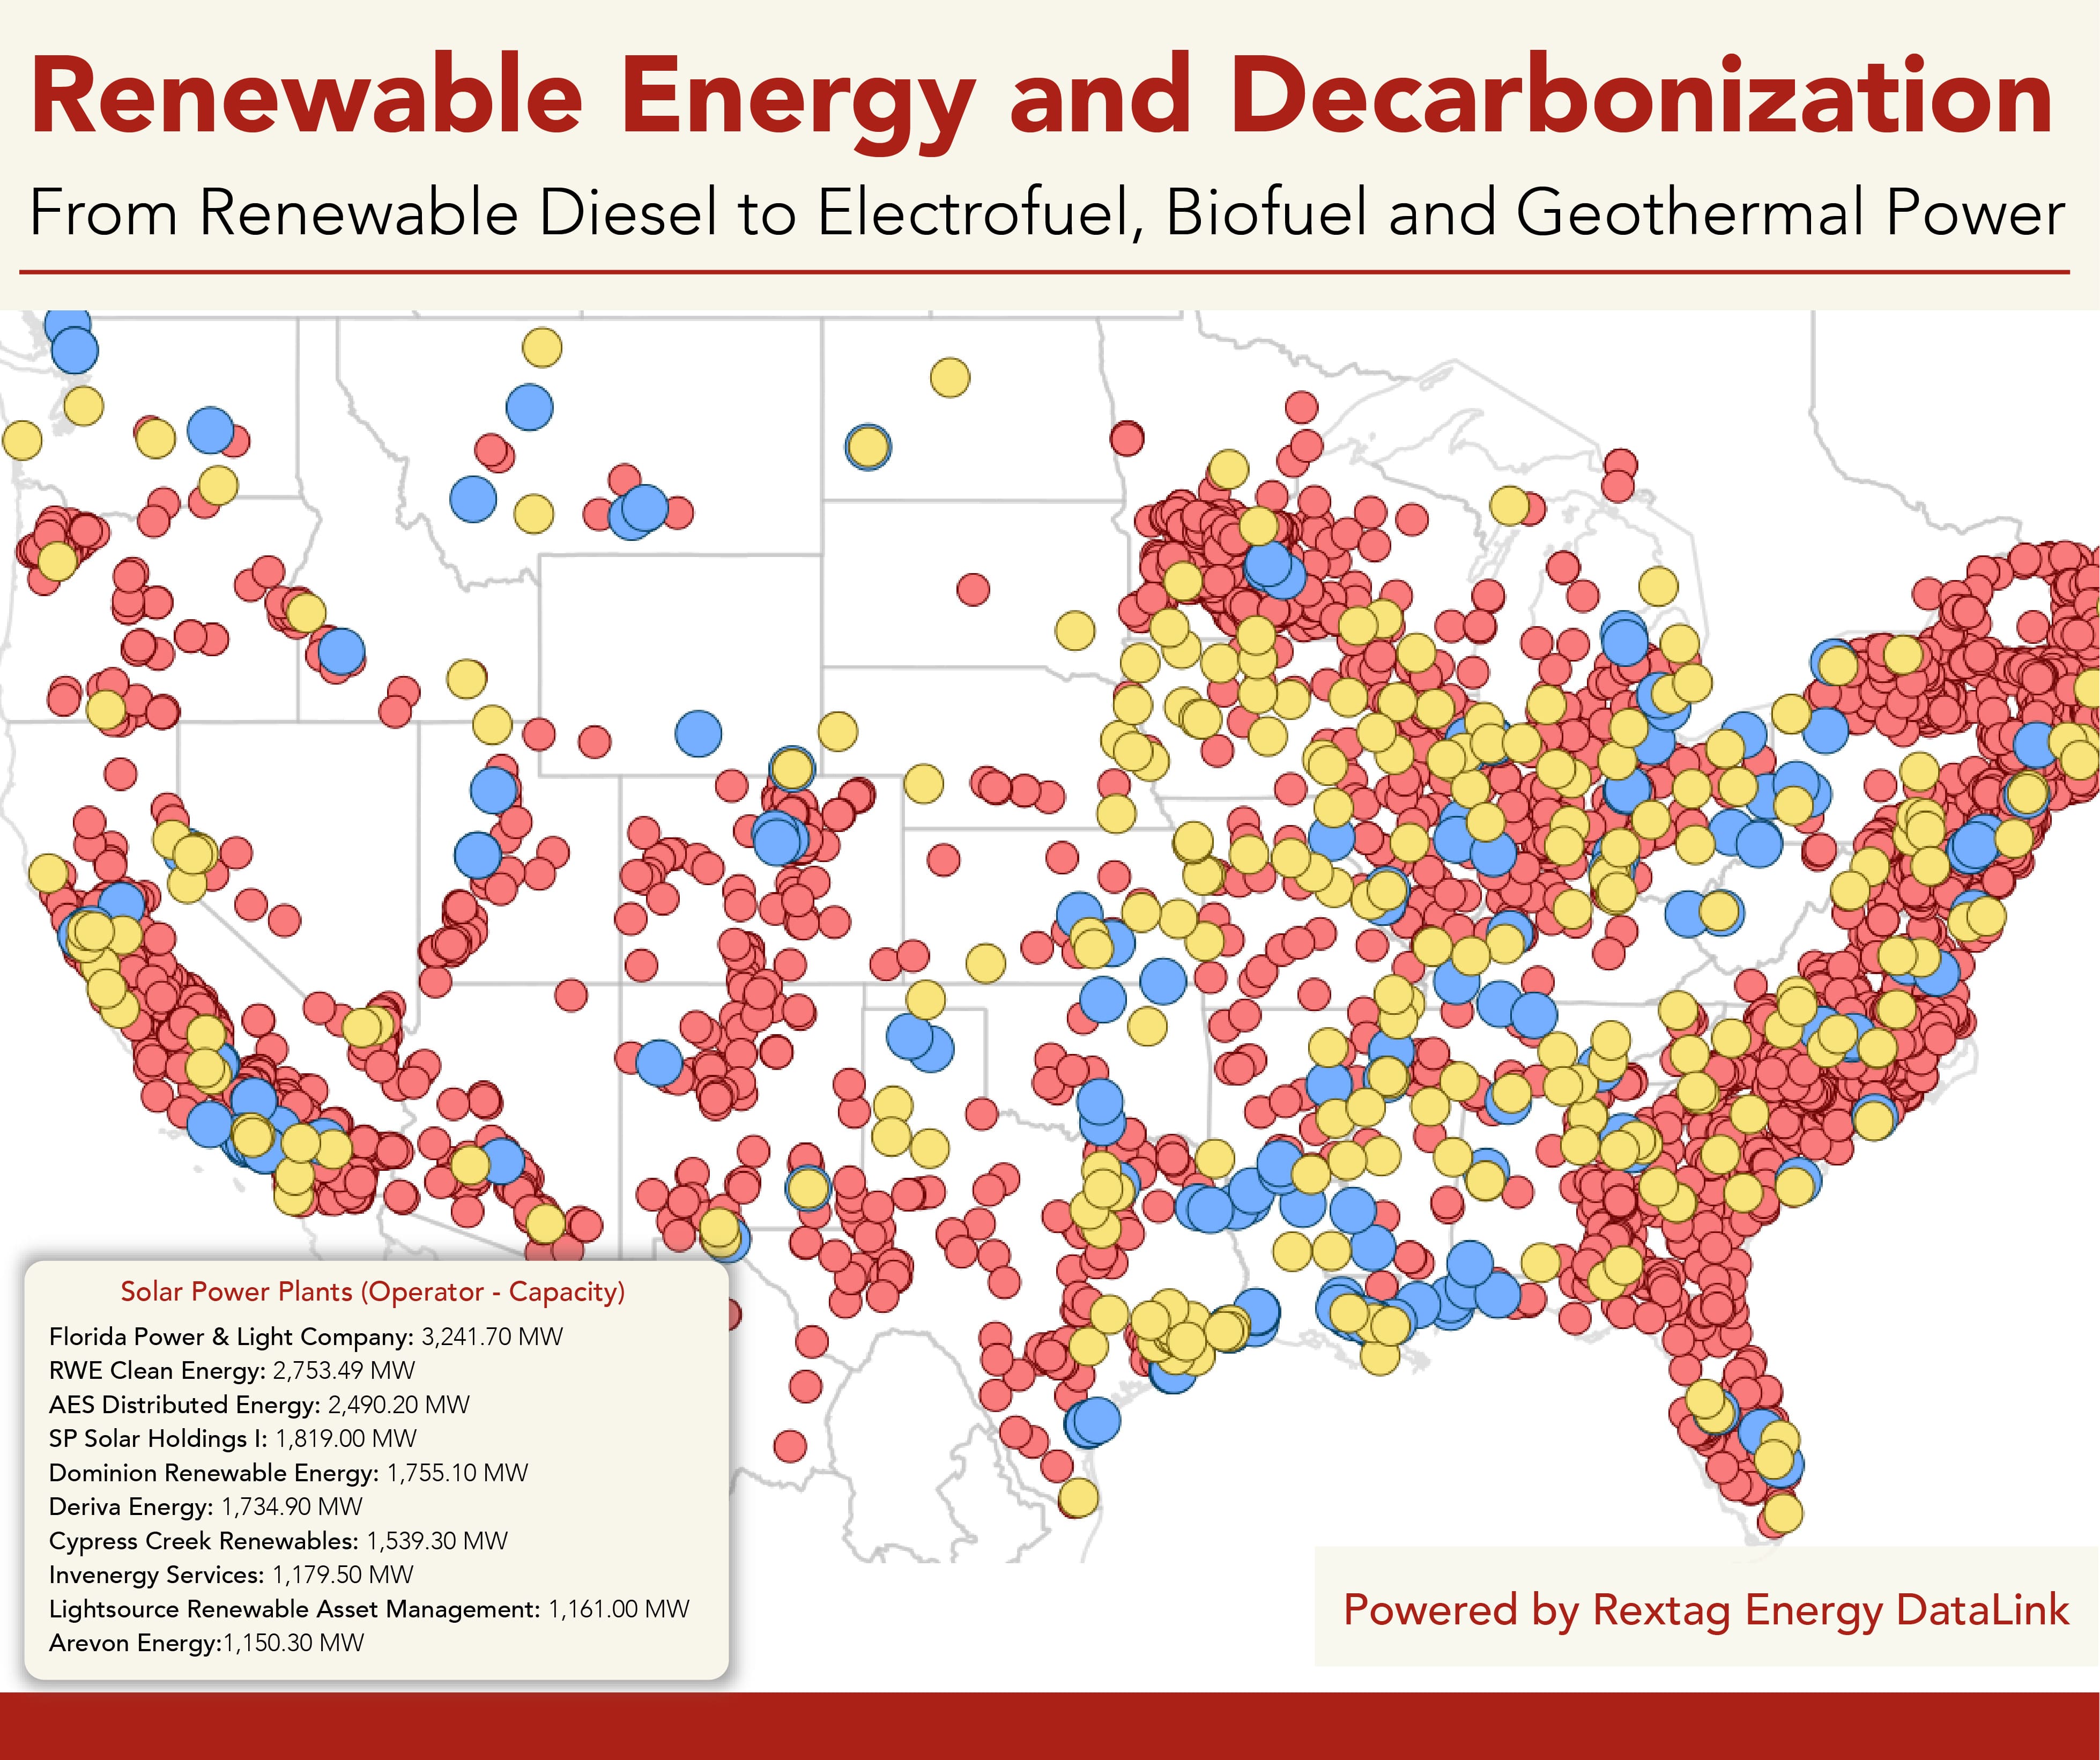 Renewable-Energy-and-Decarbonization-From-Renewable-Diesel-to-Electrofuel-Biofuel-and-Geothermal-Power 